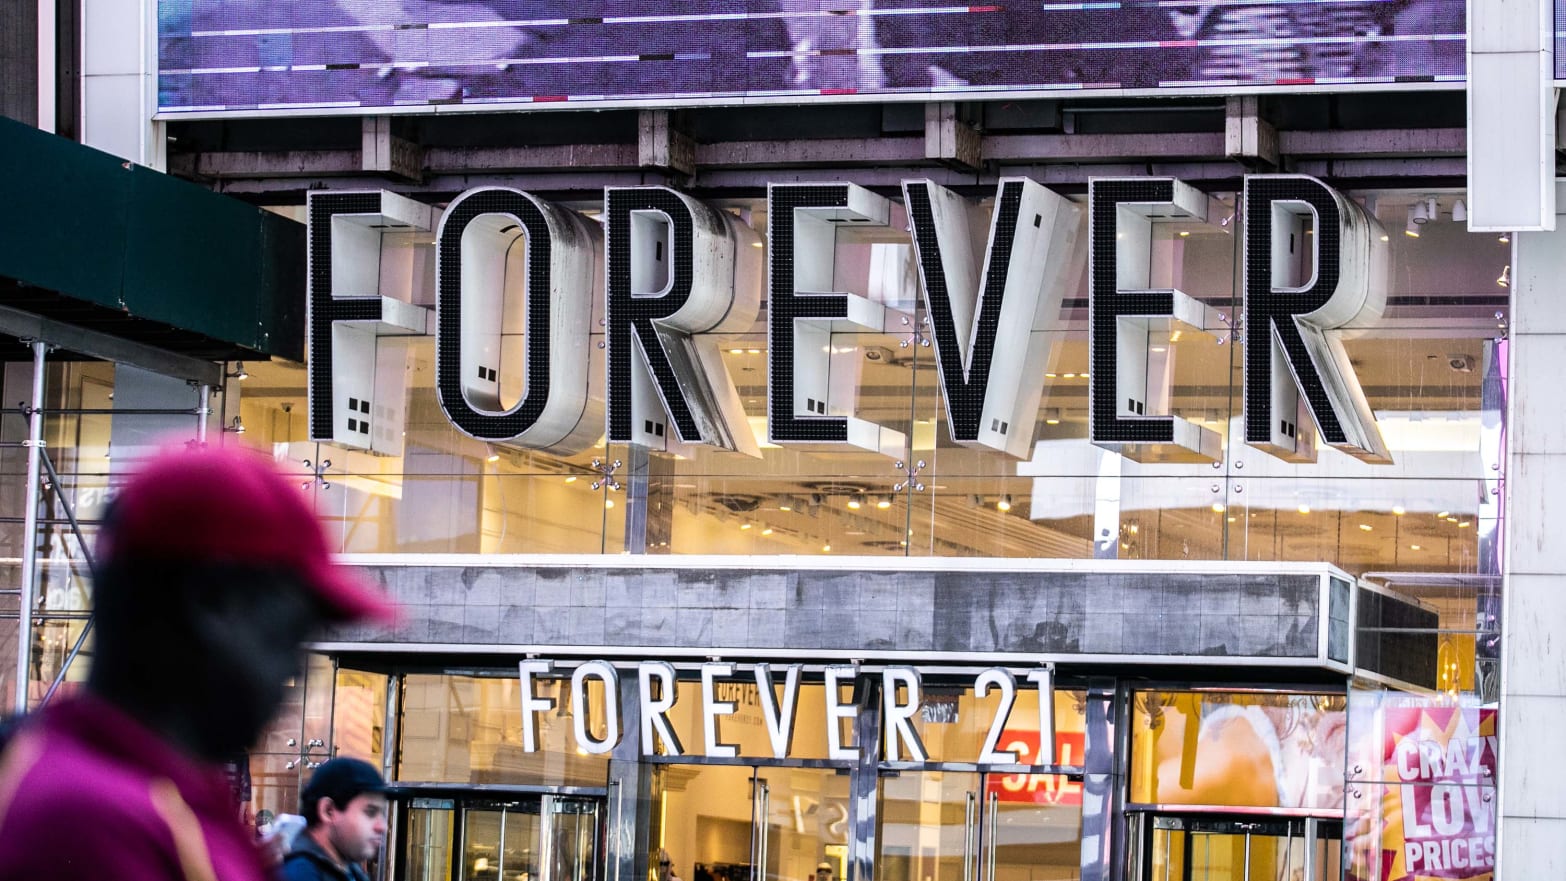 Forever 21 Haul! Times Square NYC Walk Through Let's Go Shopping! 